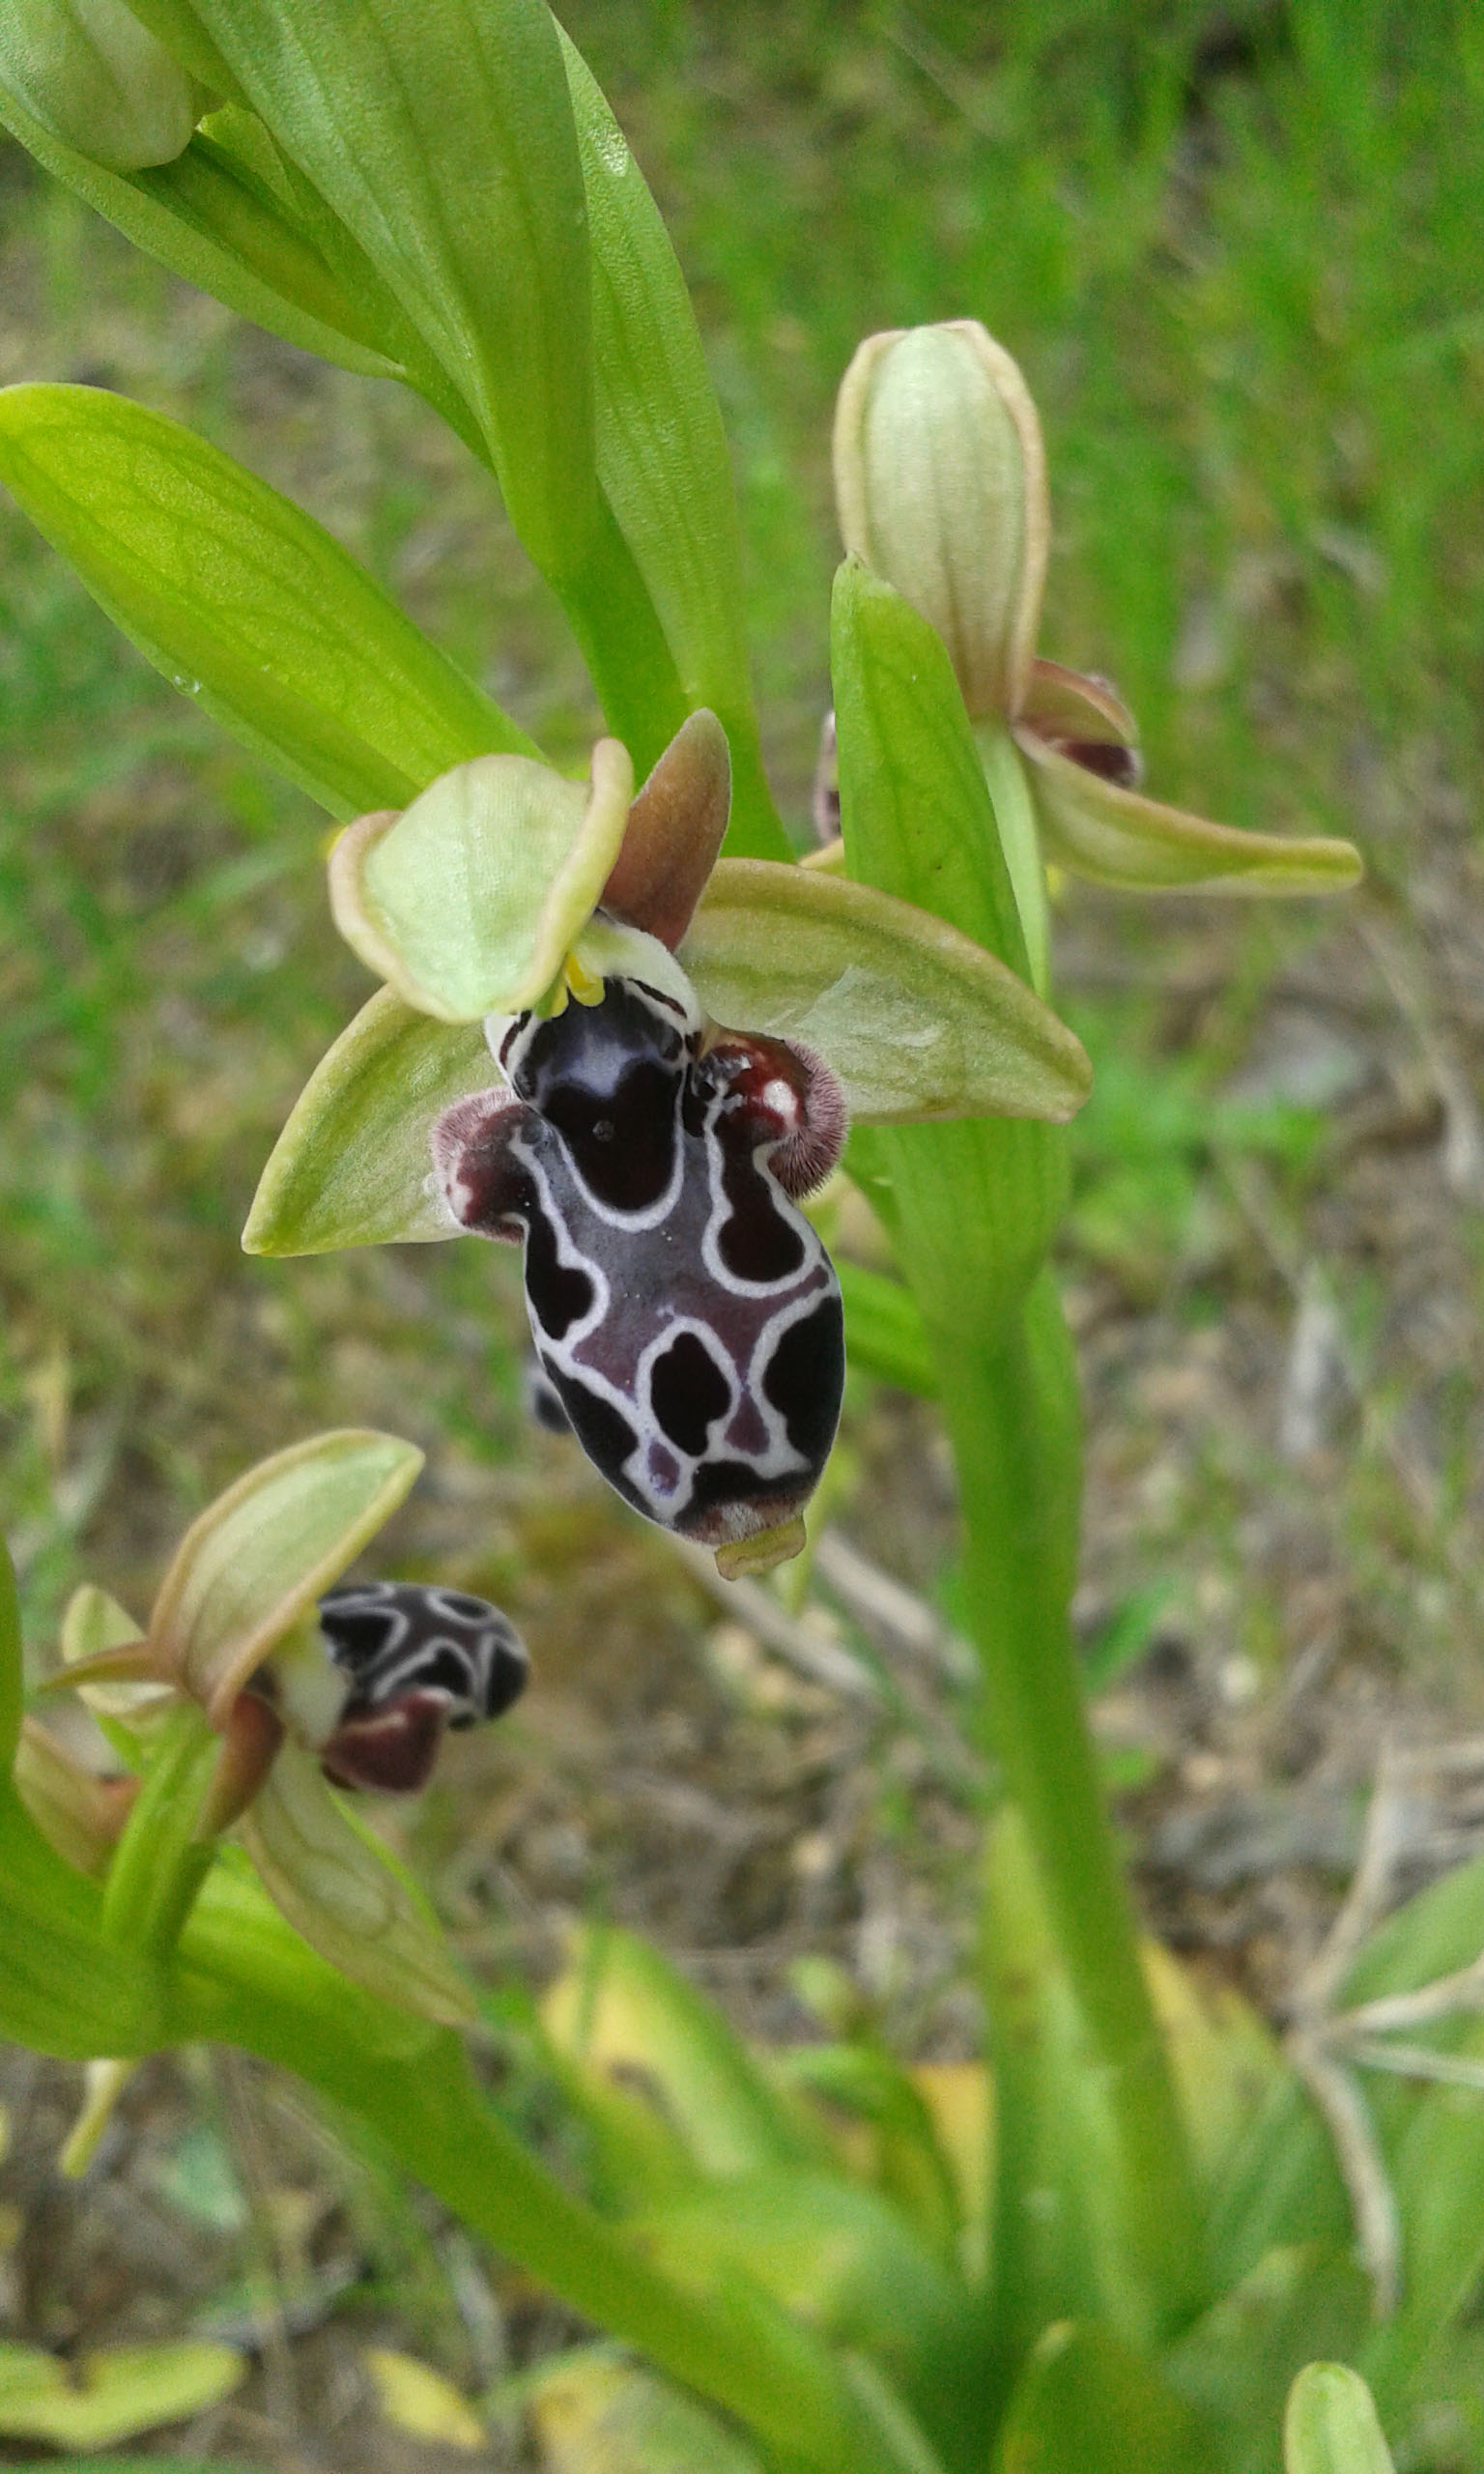 Kotschy's Ophrys